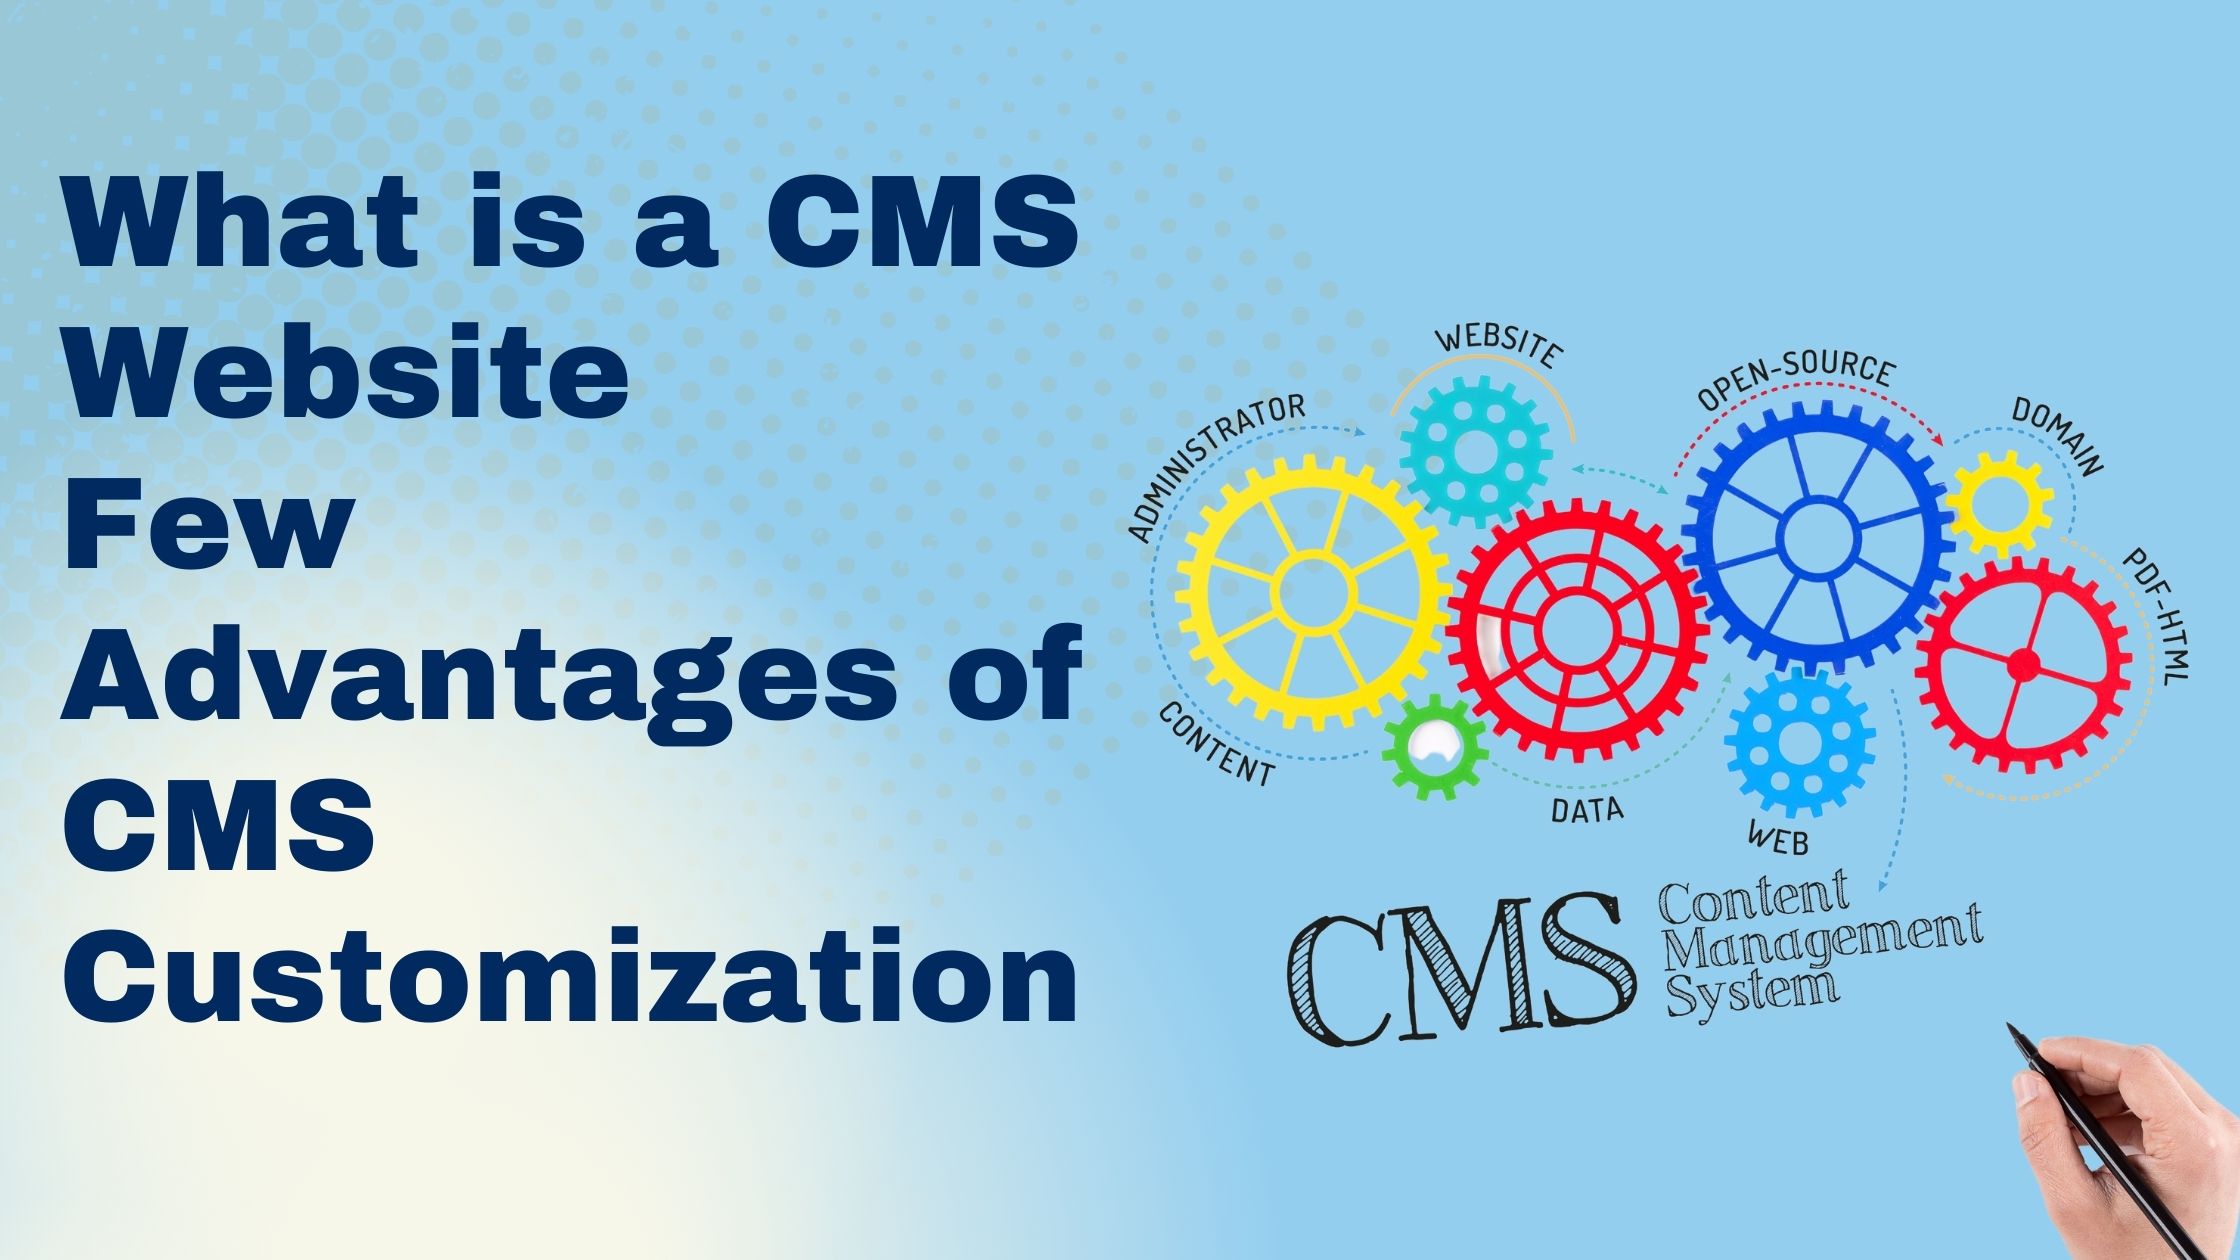 What is a CMS Website? Few Advantages of CMS Customization